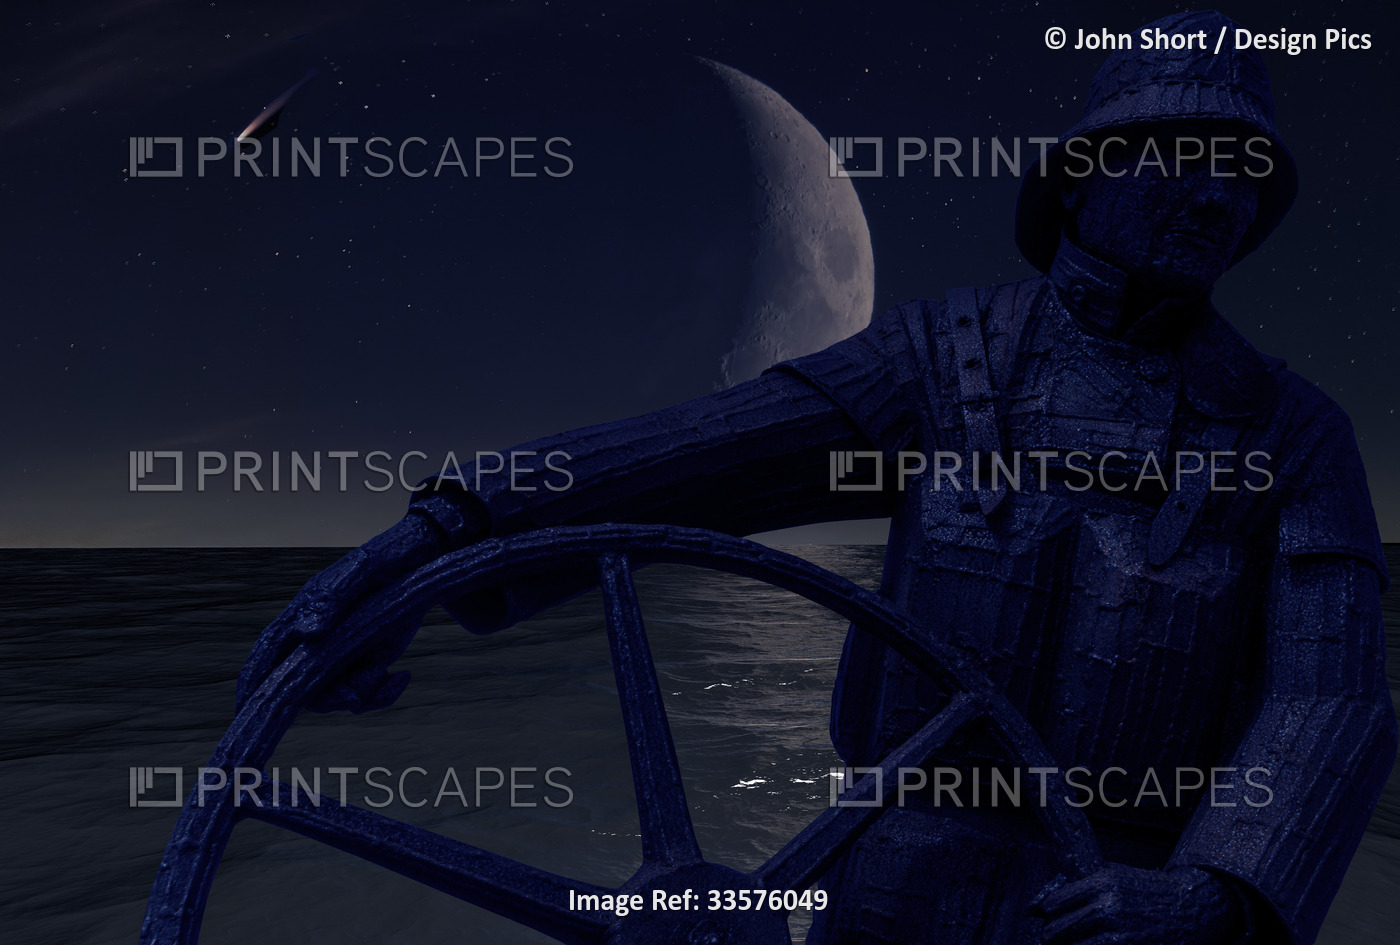 Sculpture of a seaman at a ship's wheel with a crescent moon over the ocean; ...